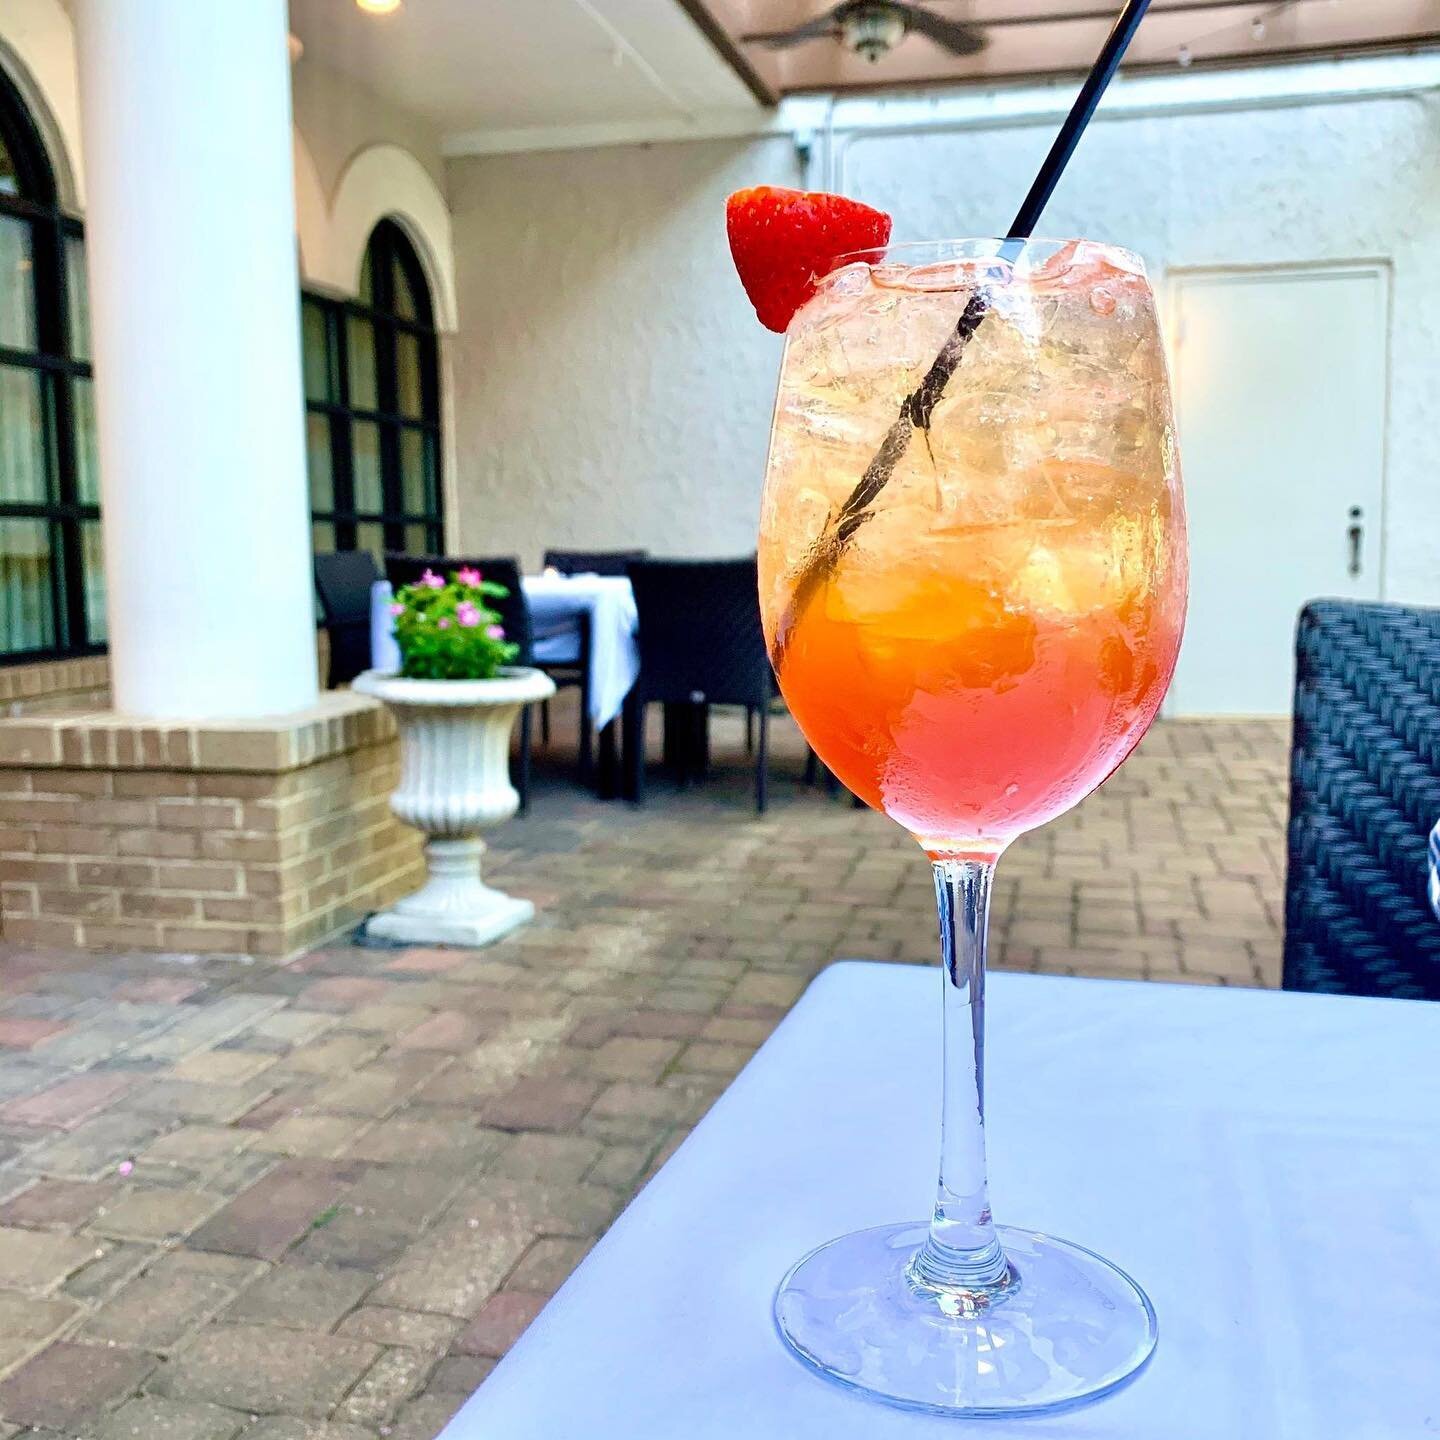 A cocktail under the pergola is one of our favorite ways to unwind. @il_palio has a new cocktail that we know you will enjoy, the Pimm's Spritz! 

#ilpalionc #thesienahotel #visitchapelhill #italiancooking